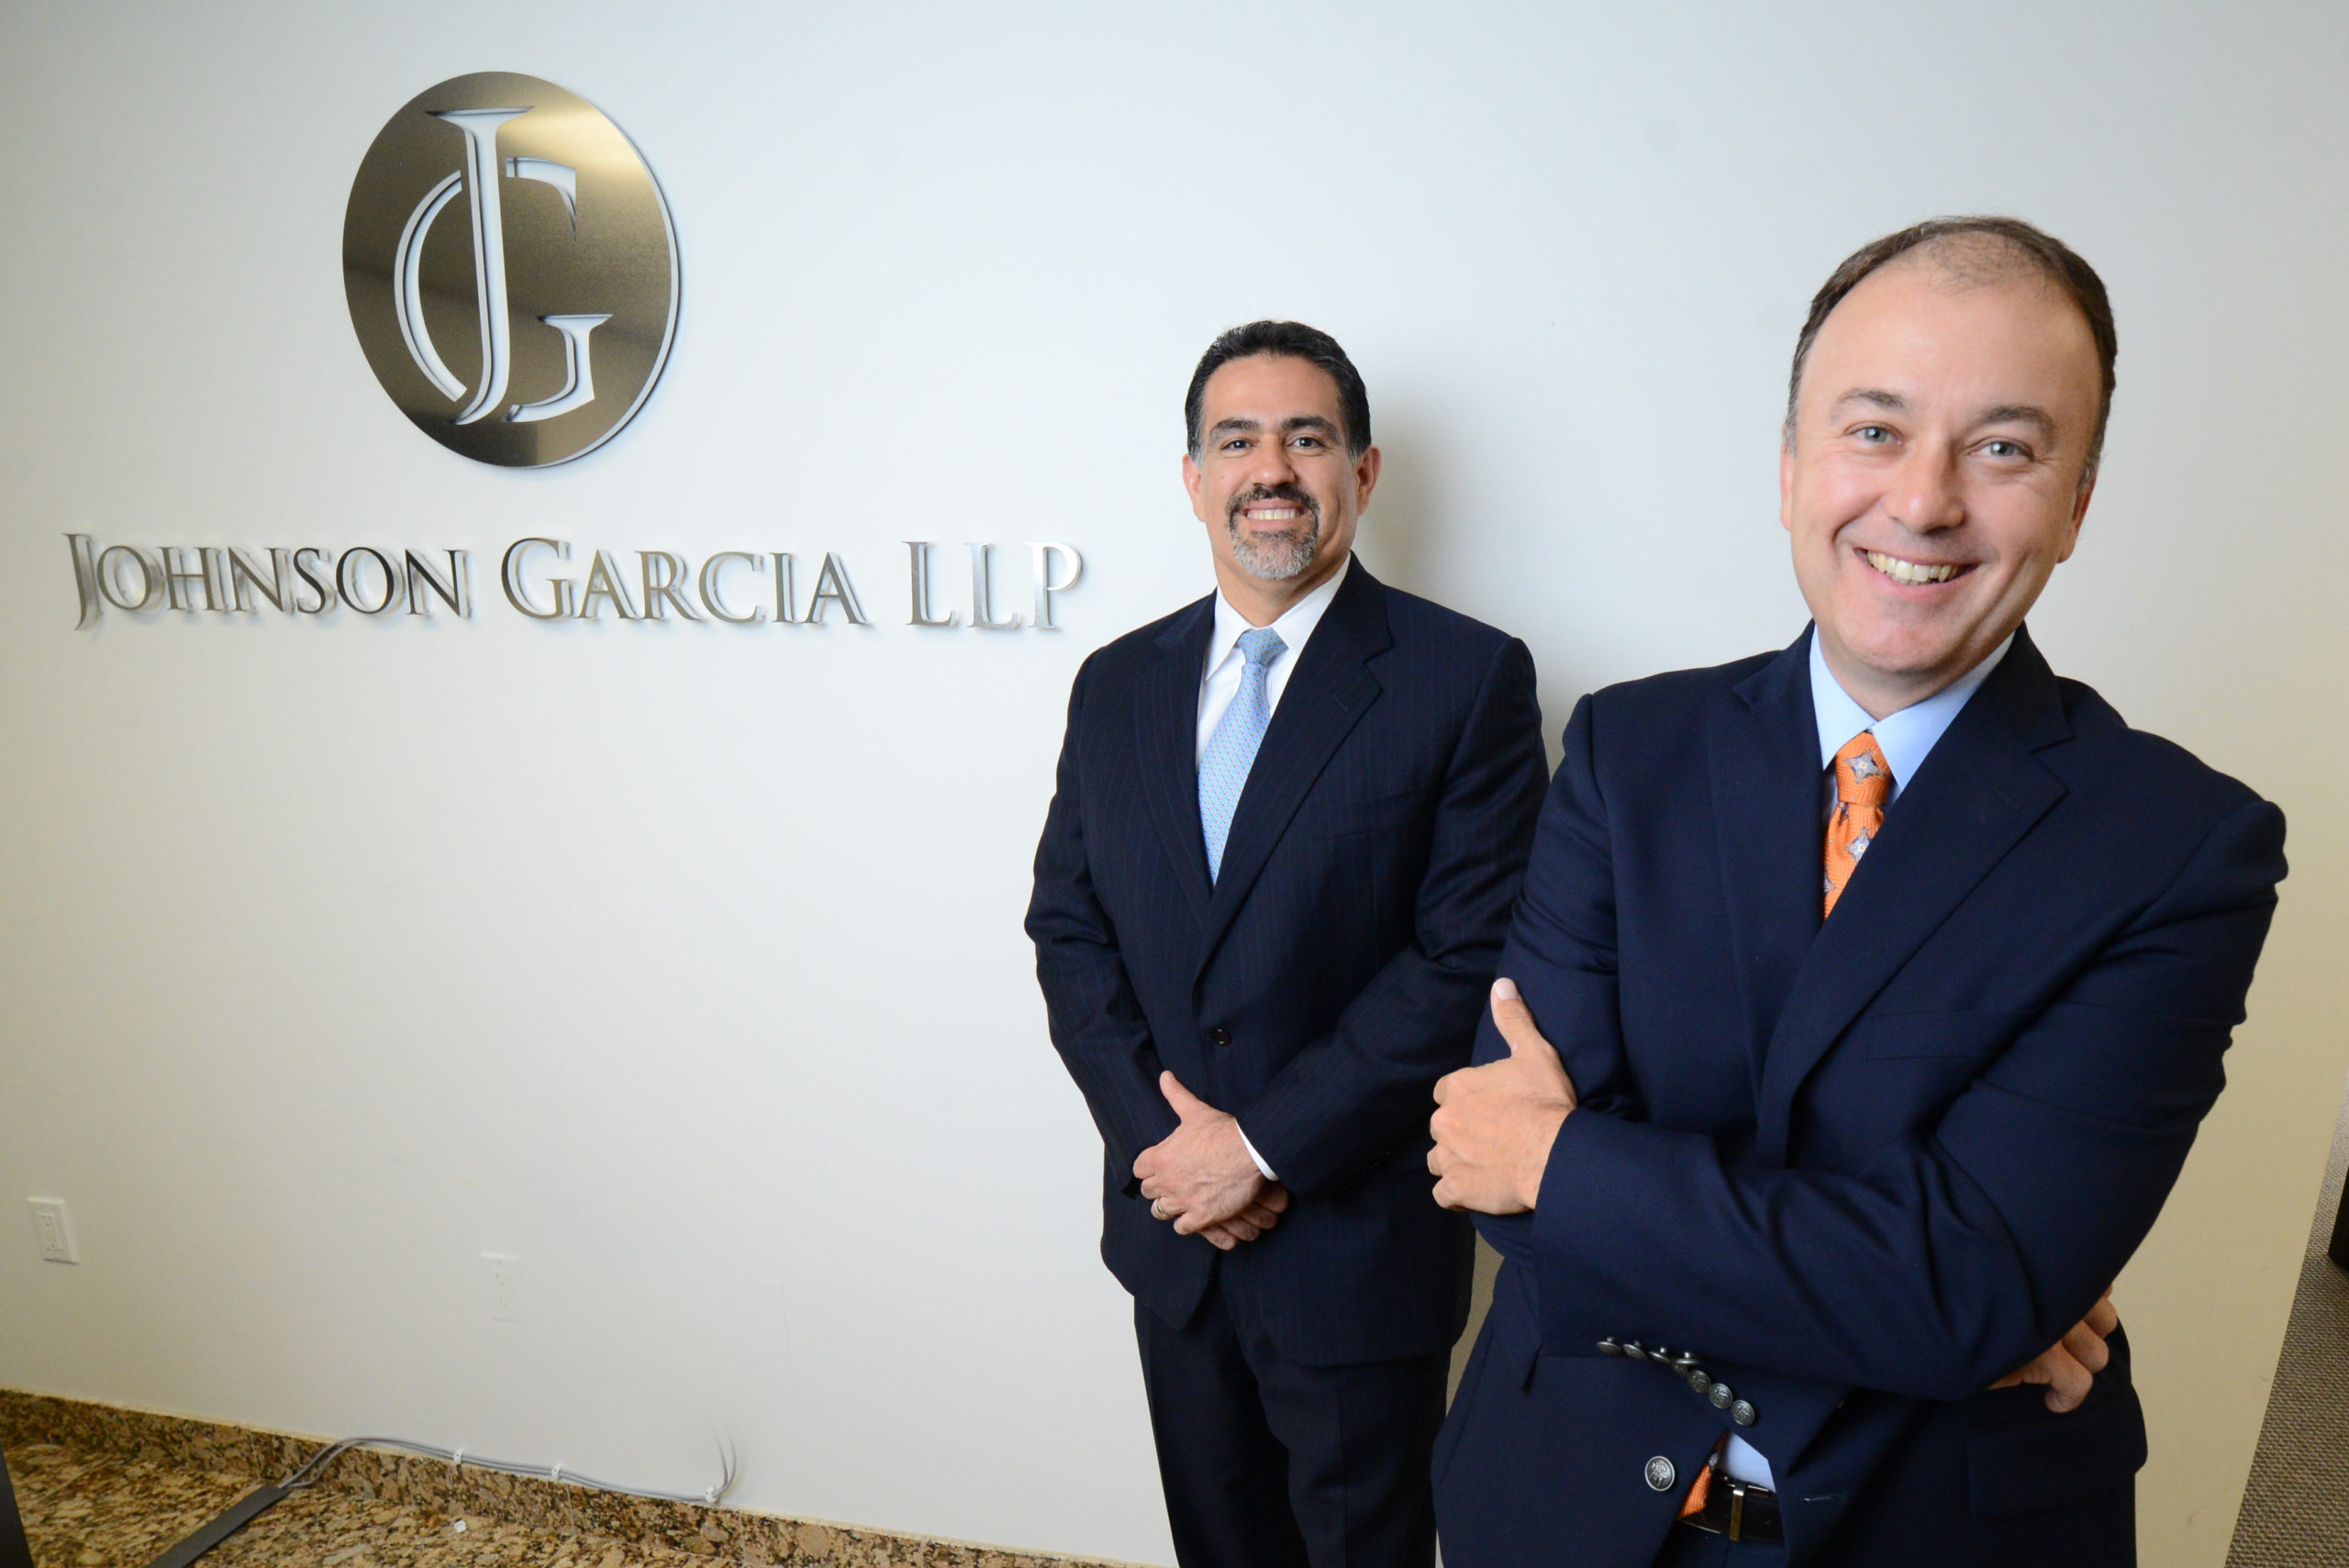 Johnson Garcia LLP Houston personal injury lawyers offer a free consultation to answer all your accident claim questions.